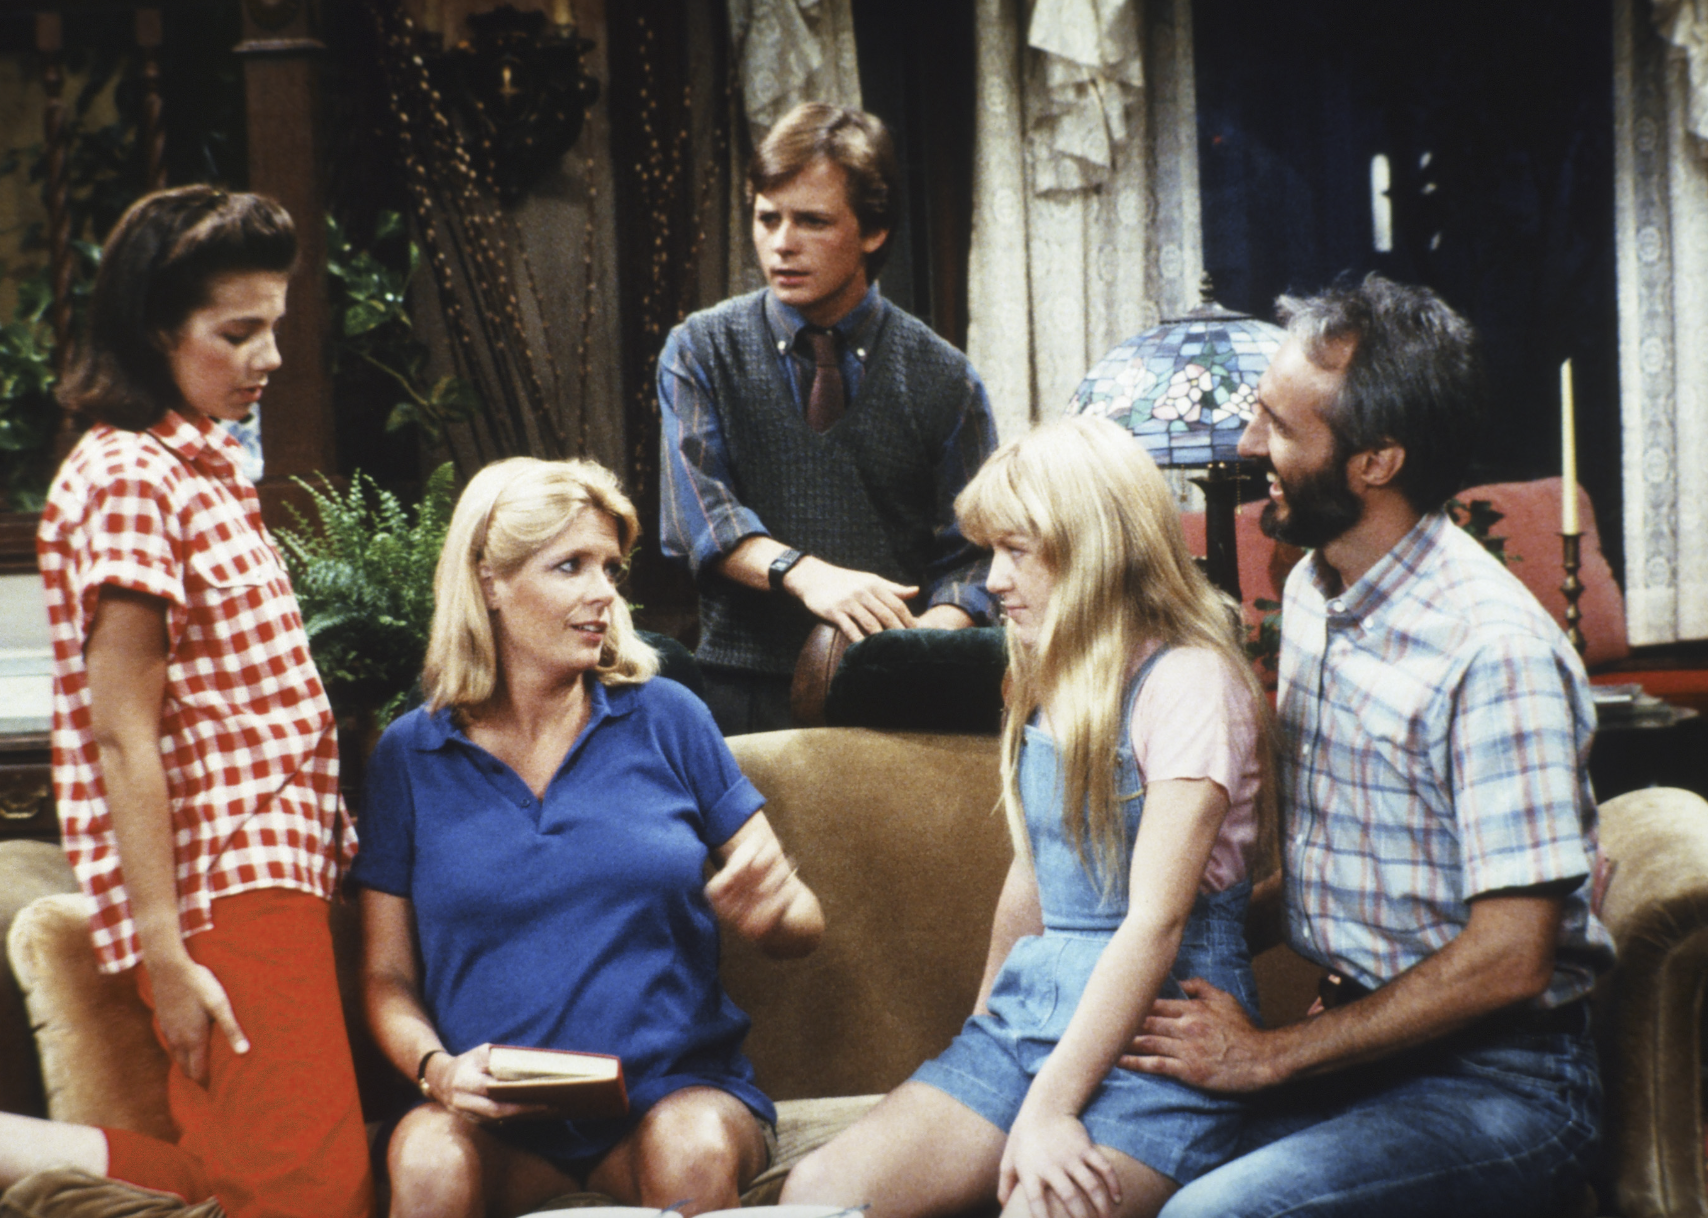 Michael J. Fox, Justine Bateman, Meredith Baxter, Tina Yothers, and Michael Gross in "Family Ties"